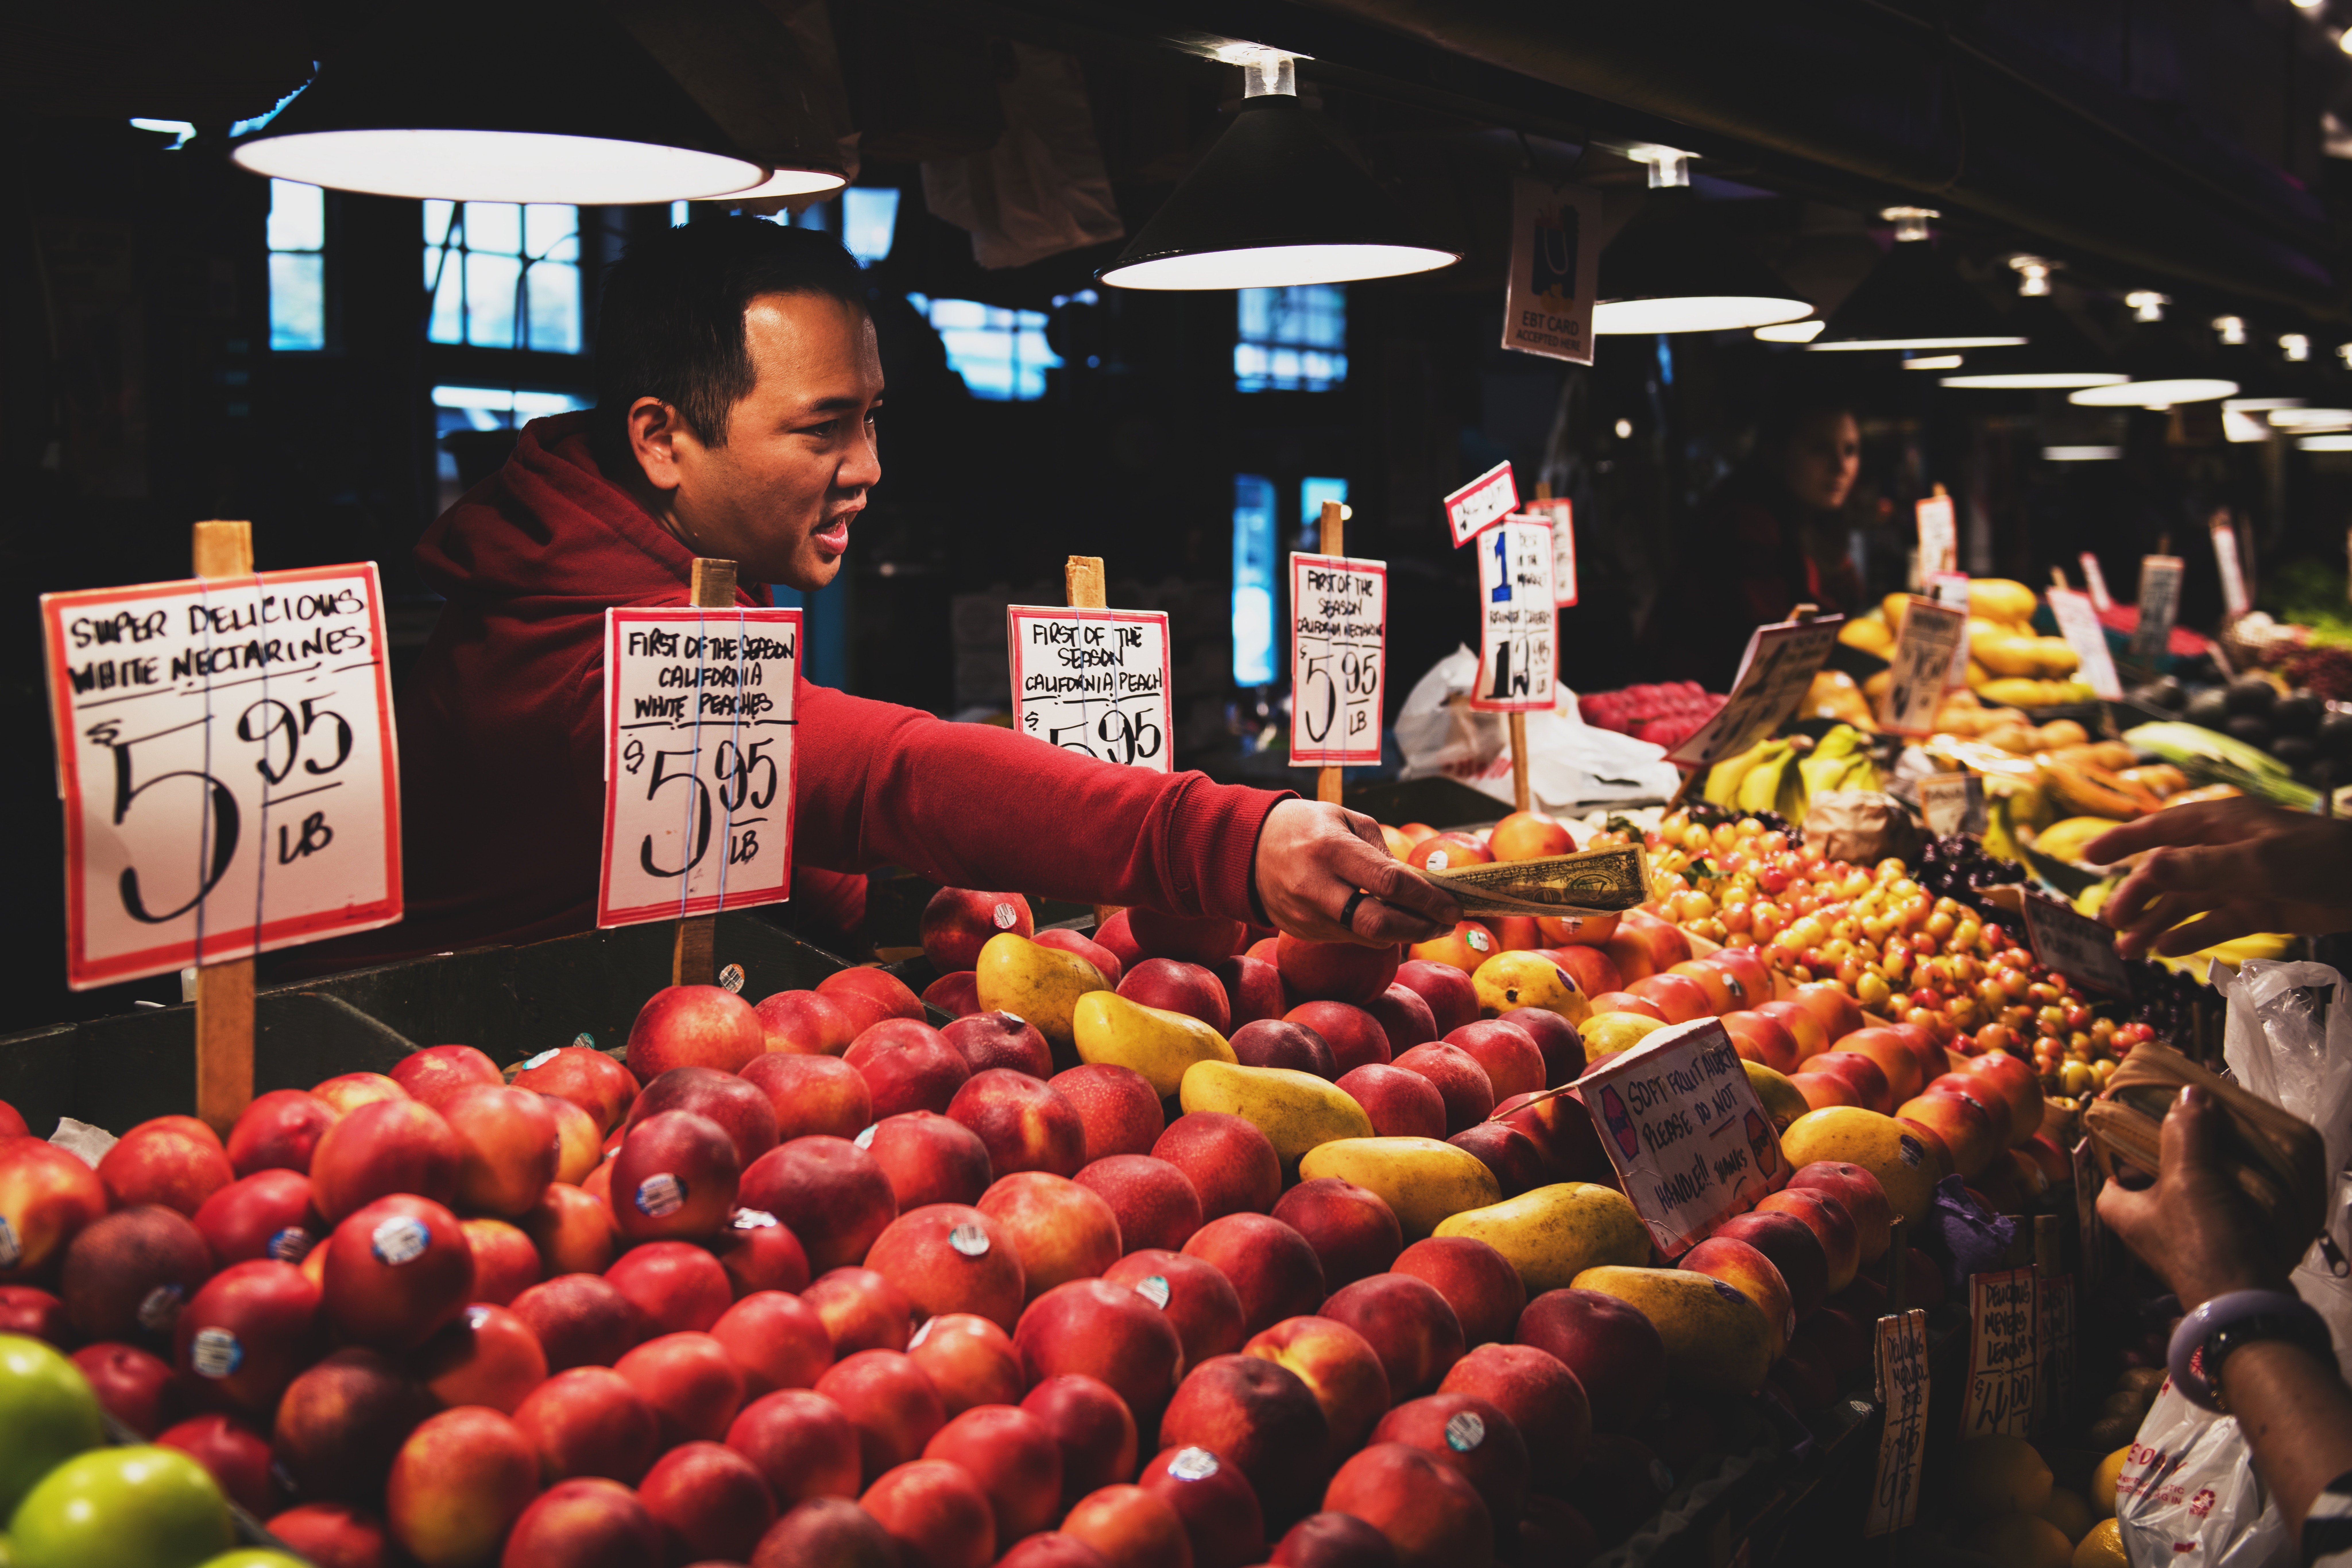 Photograph of a man returning some change after someone has purchased fruit from his fruit stand.